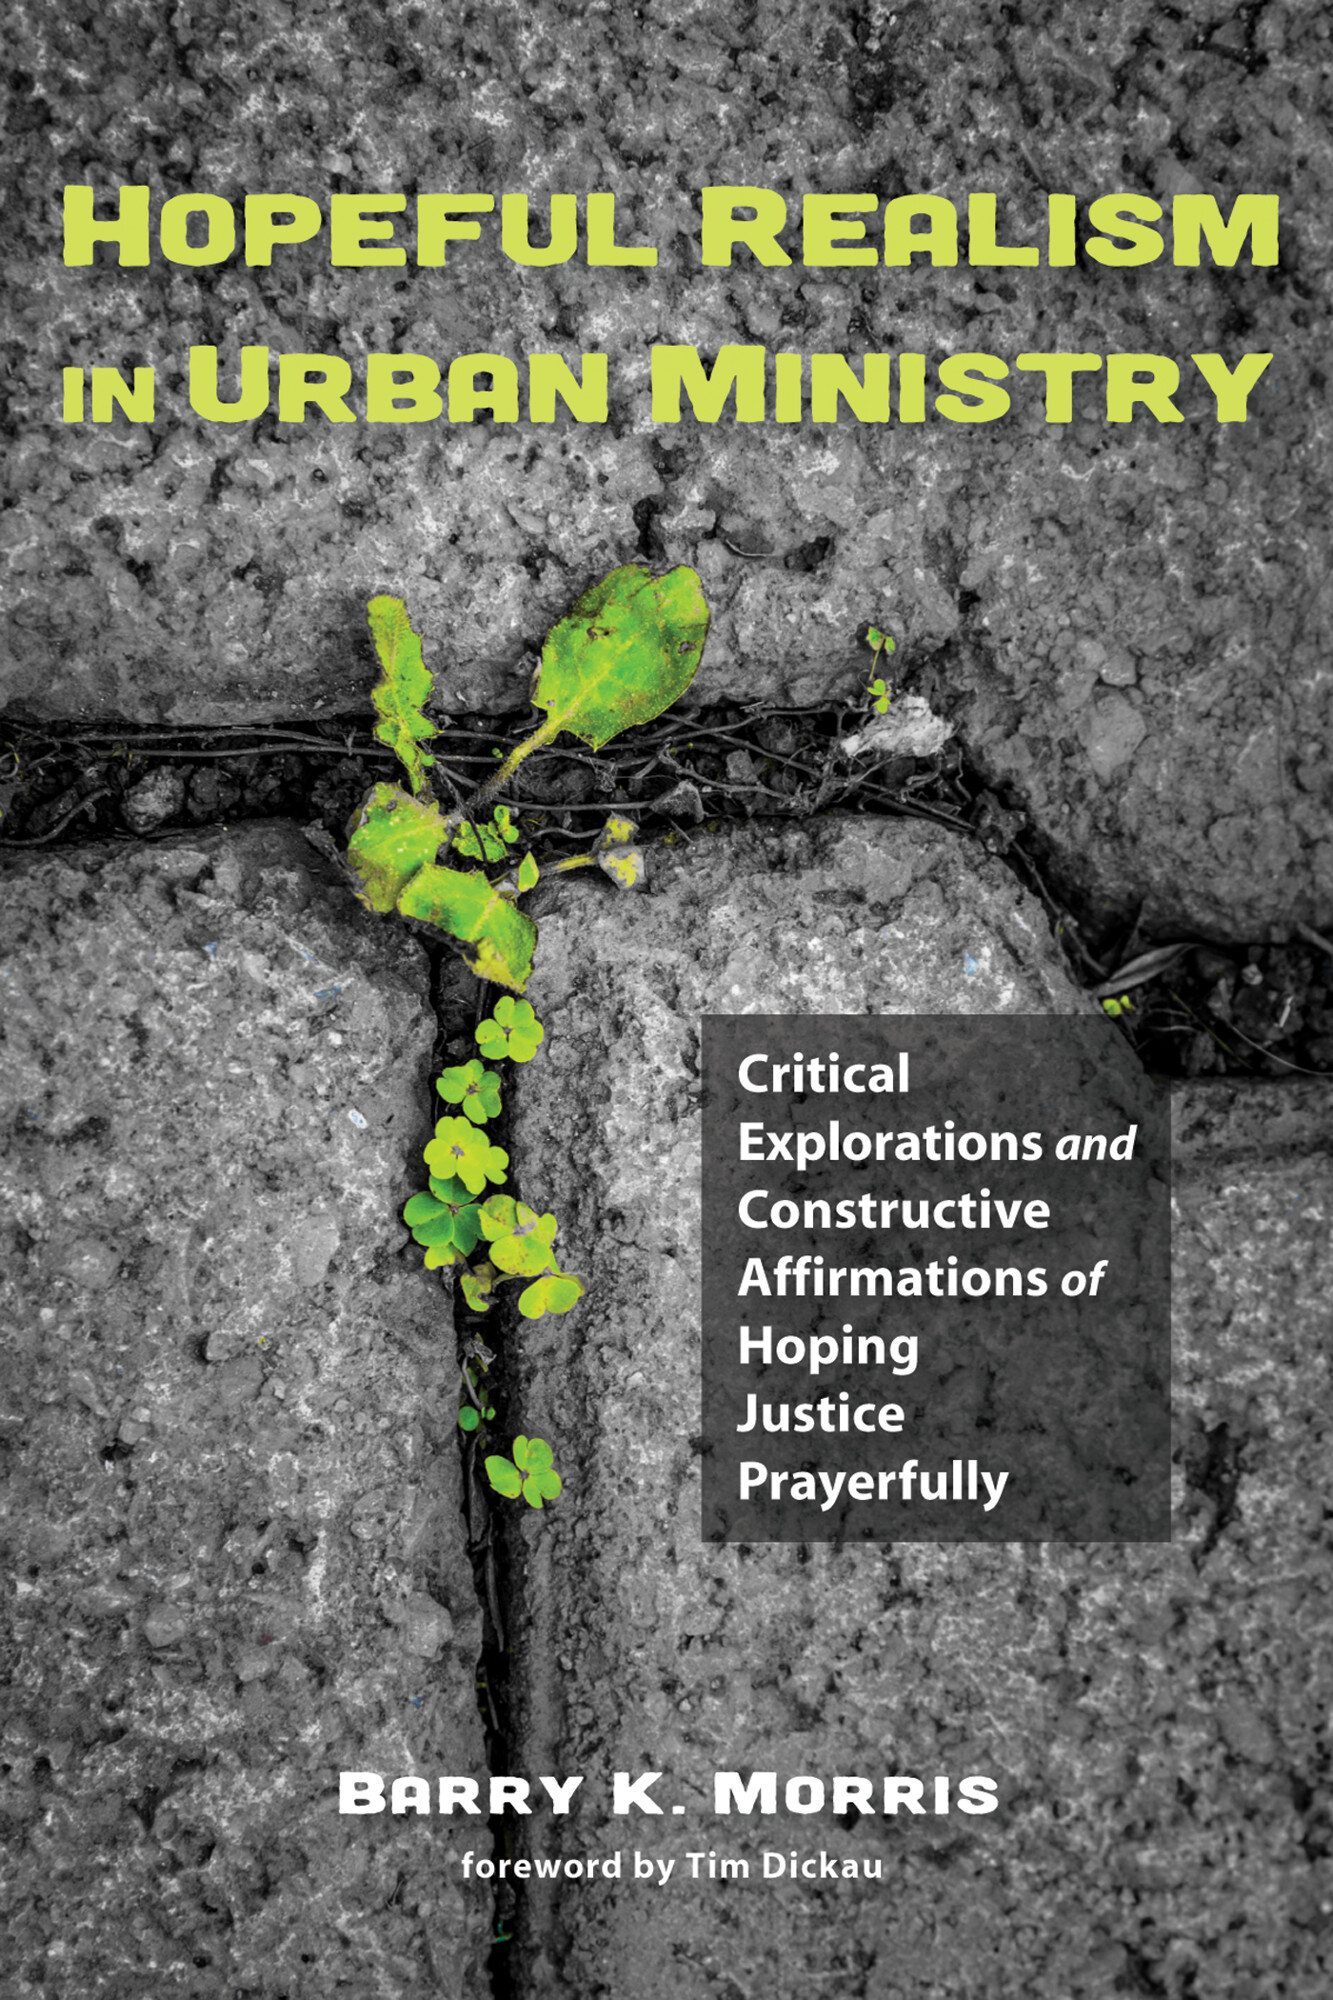 Hopeful Realism in Urban Ministry: Critical Explorations and Constructive Affirmations of Hoping Justice Prayerfully